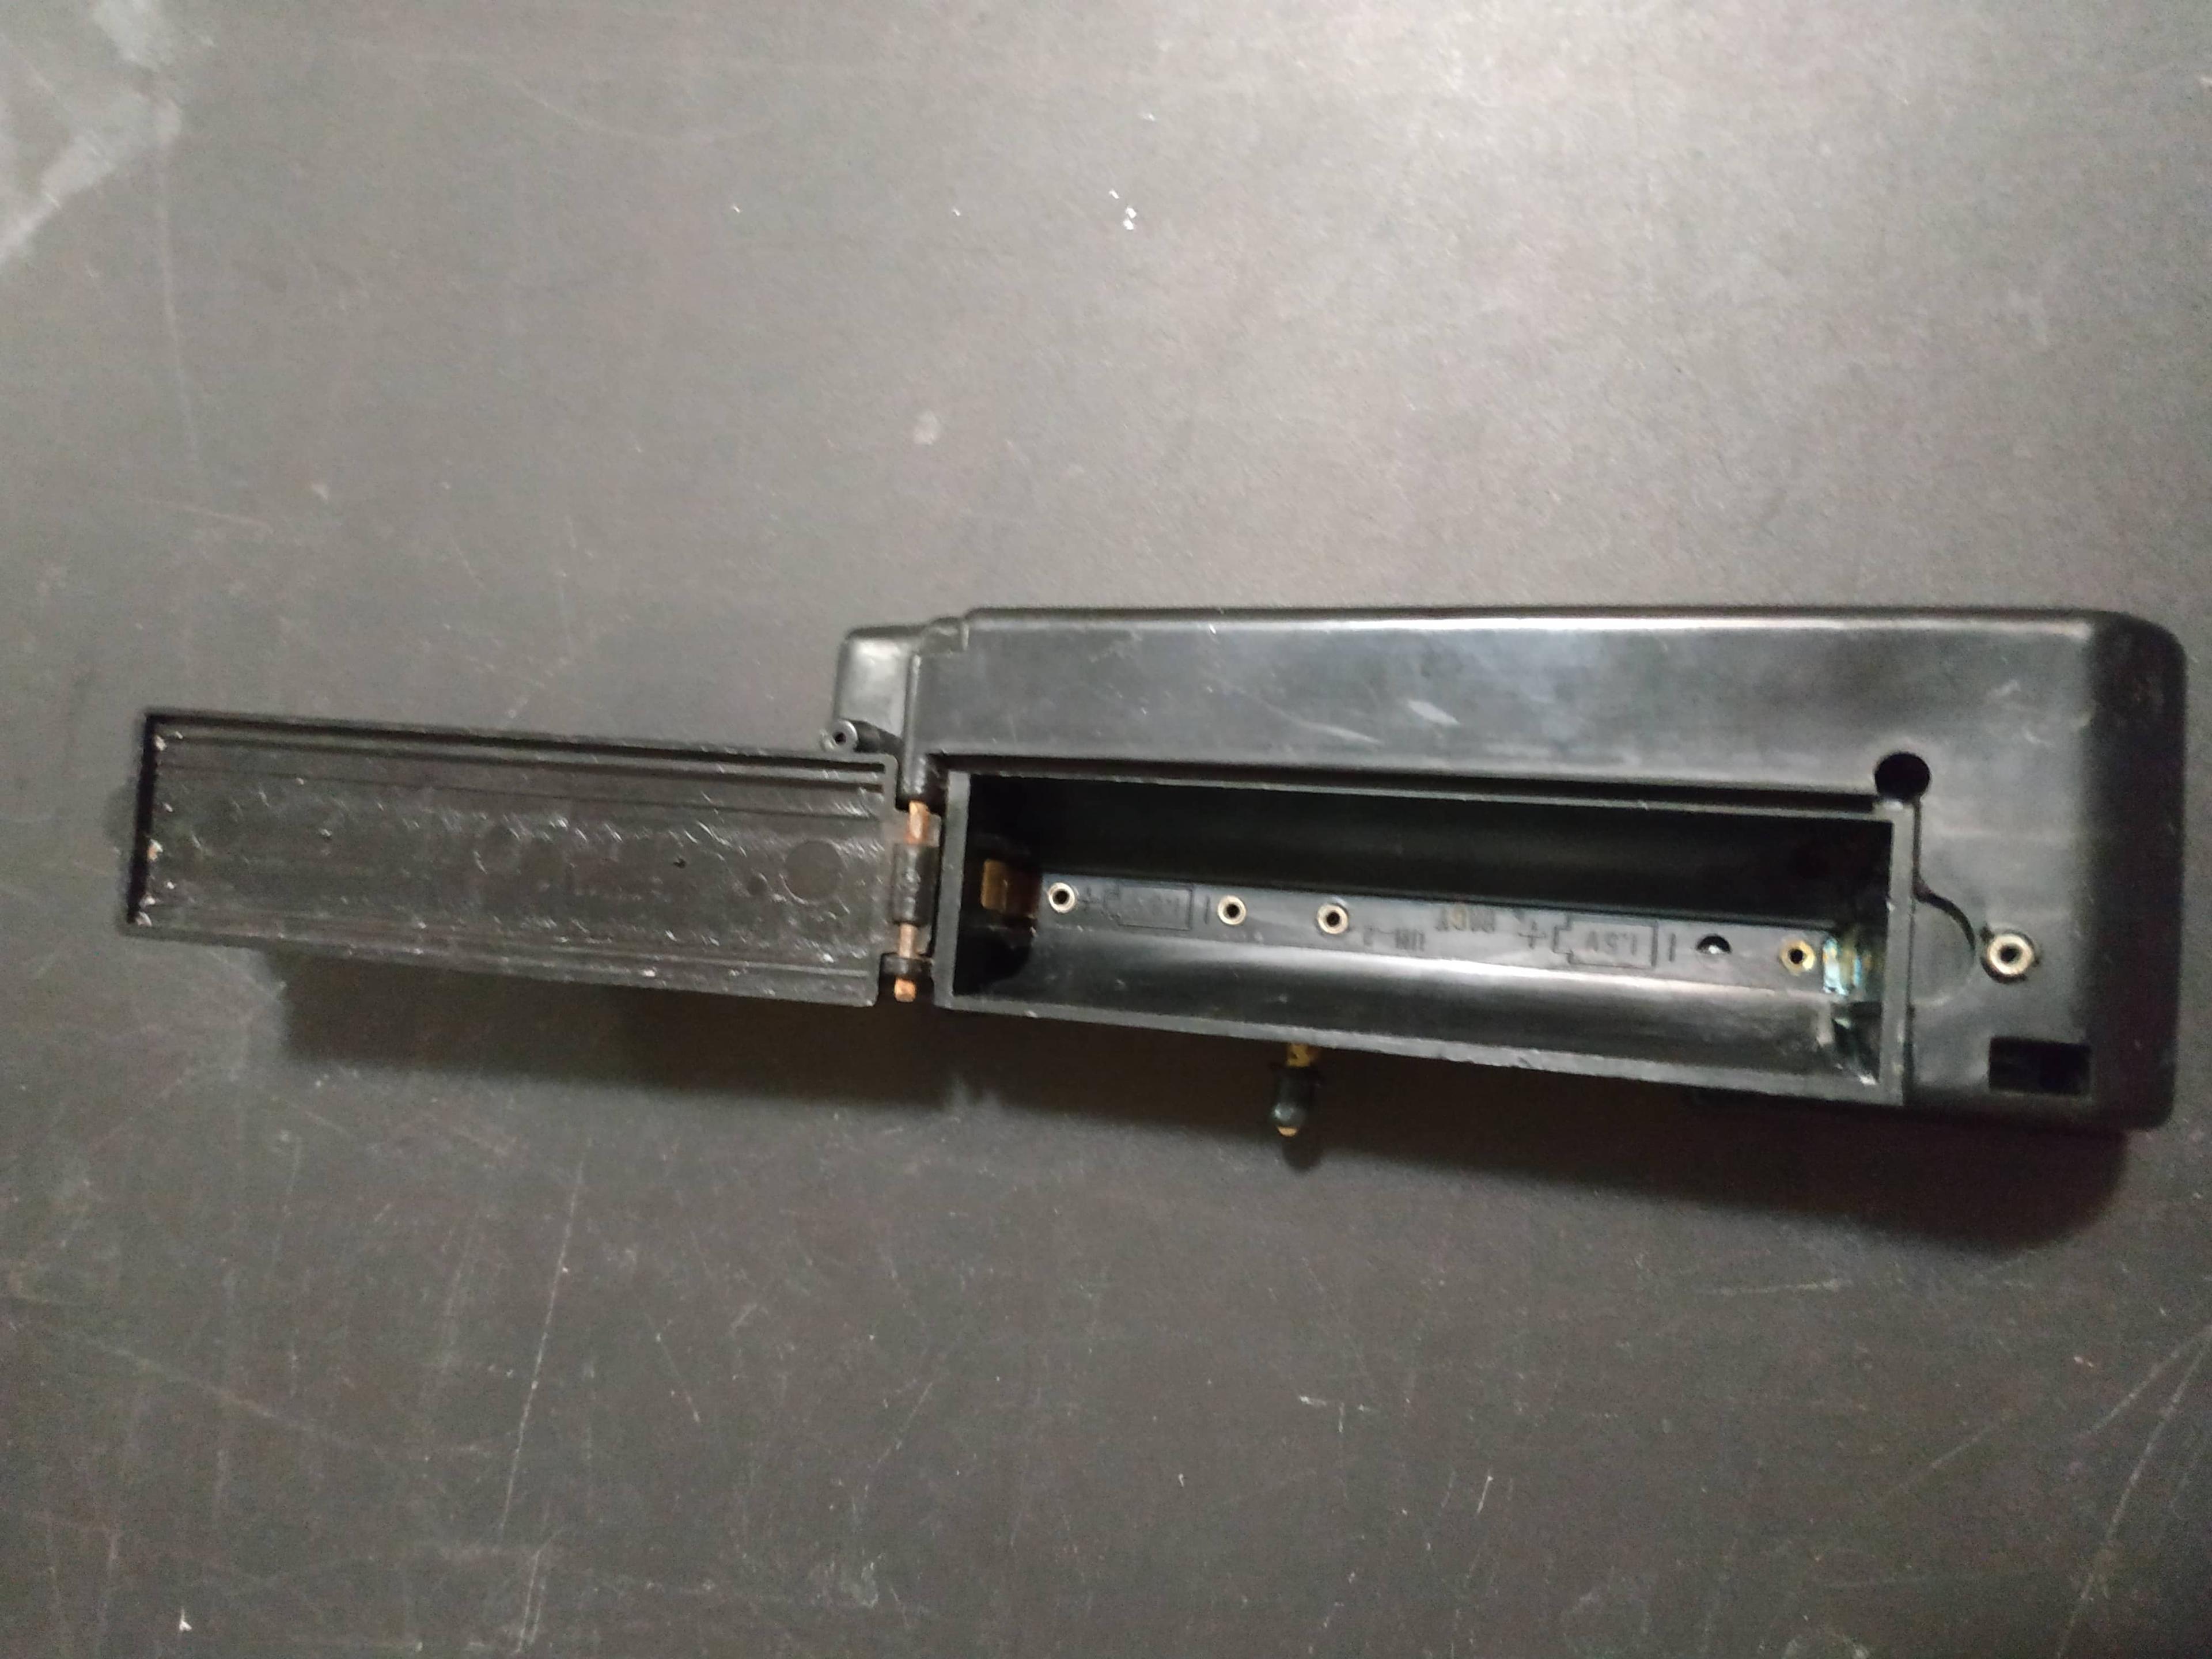 A black plastic part with a hinged battery compartment. There is noticeable blue corrosion in the corner